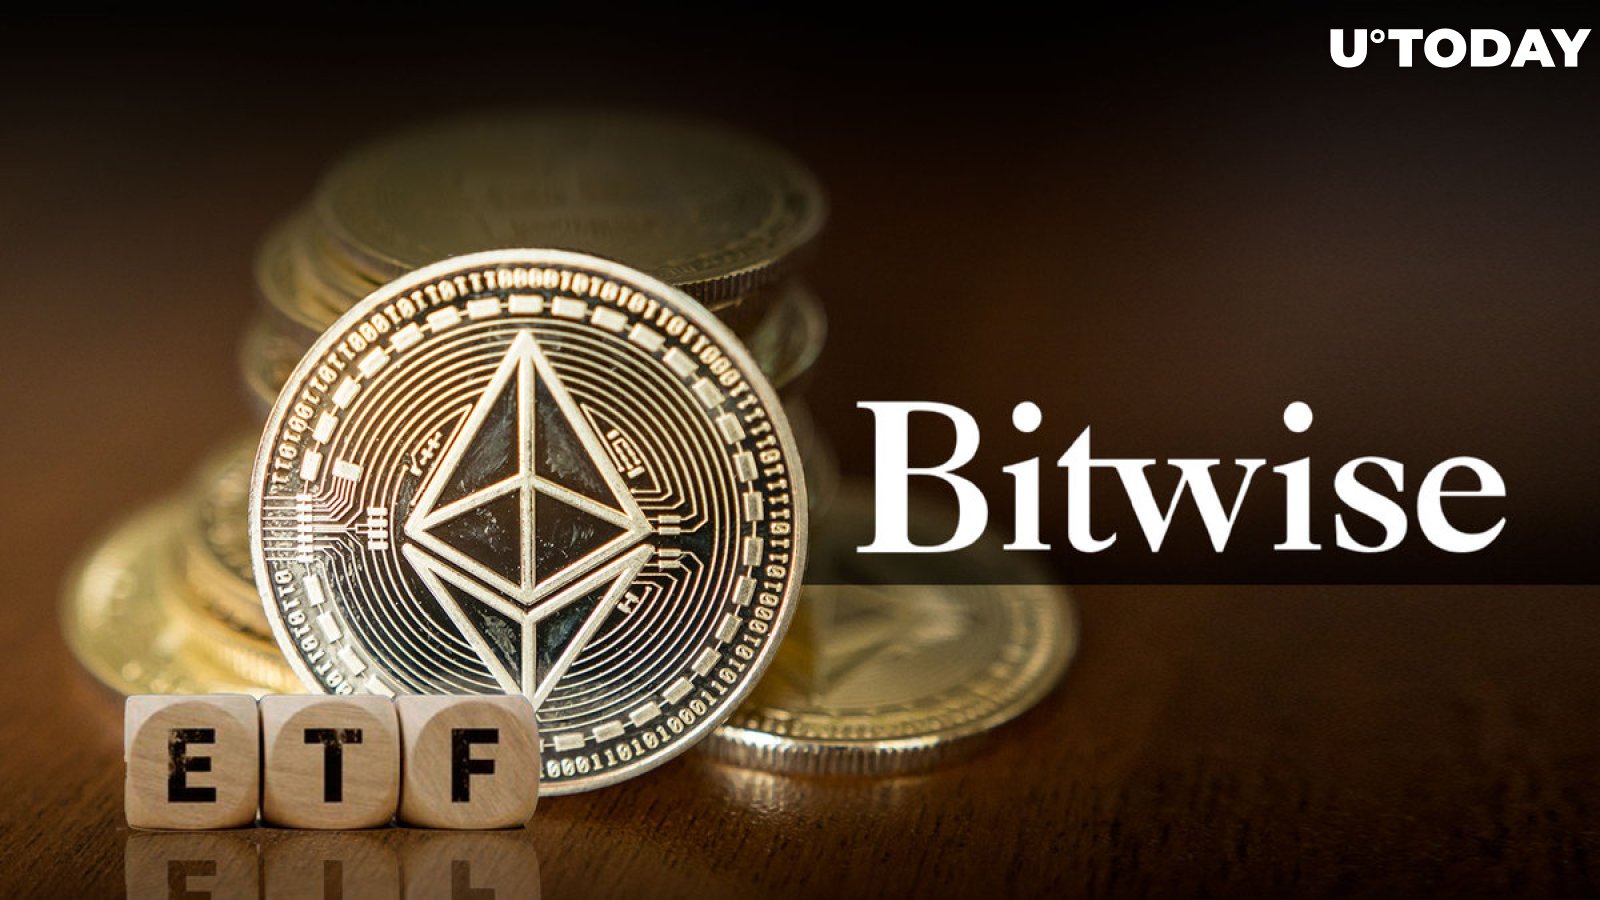 Bitwise Has Big Plans for Ethereum Developers, Here's What They Are